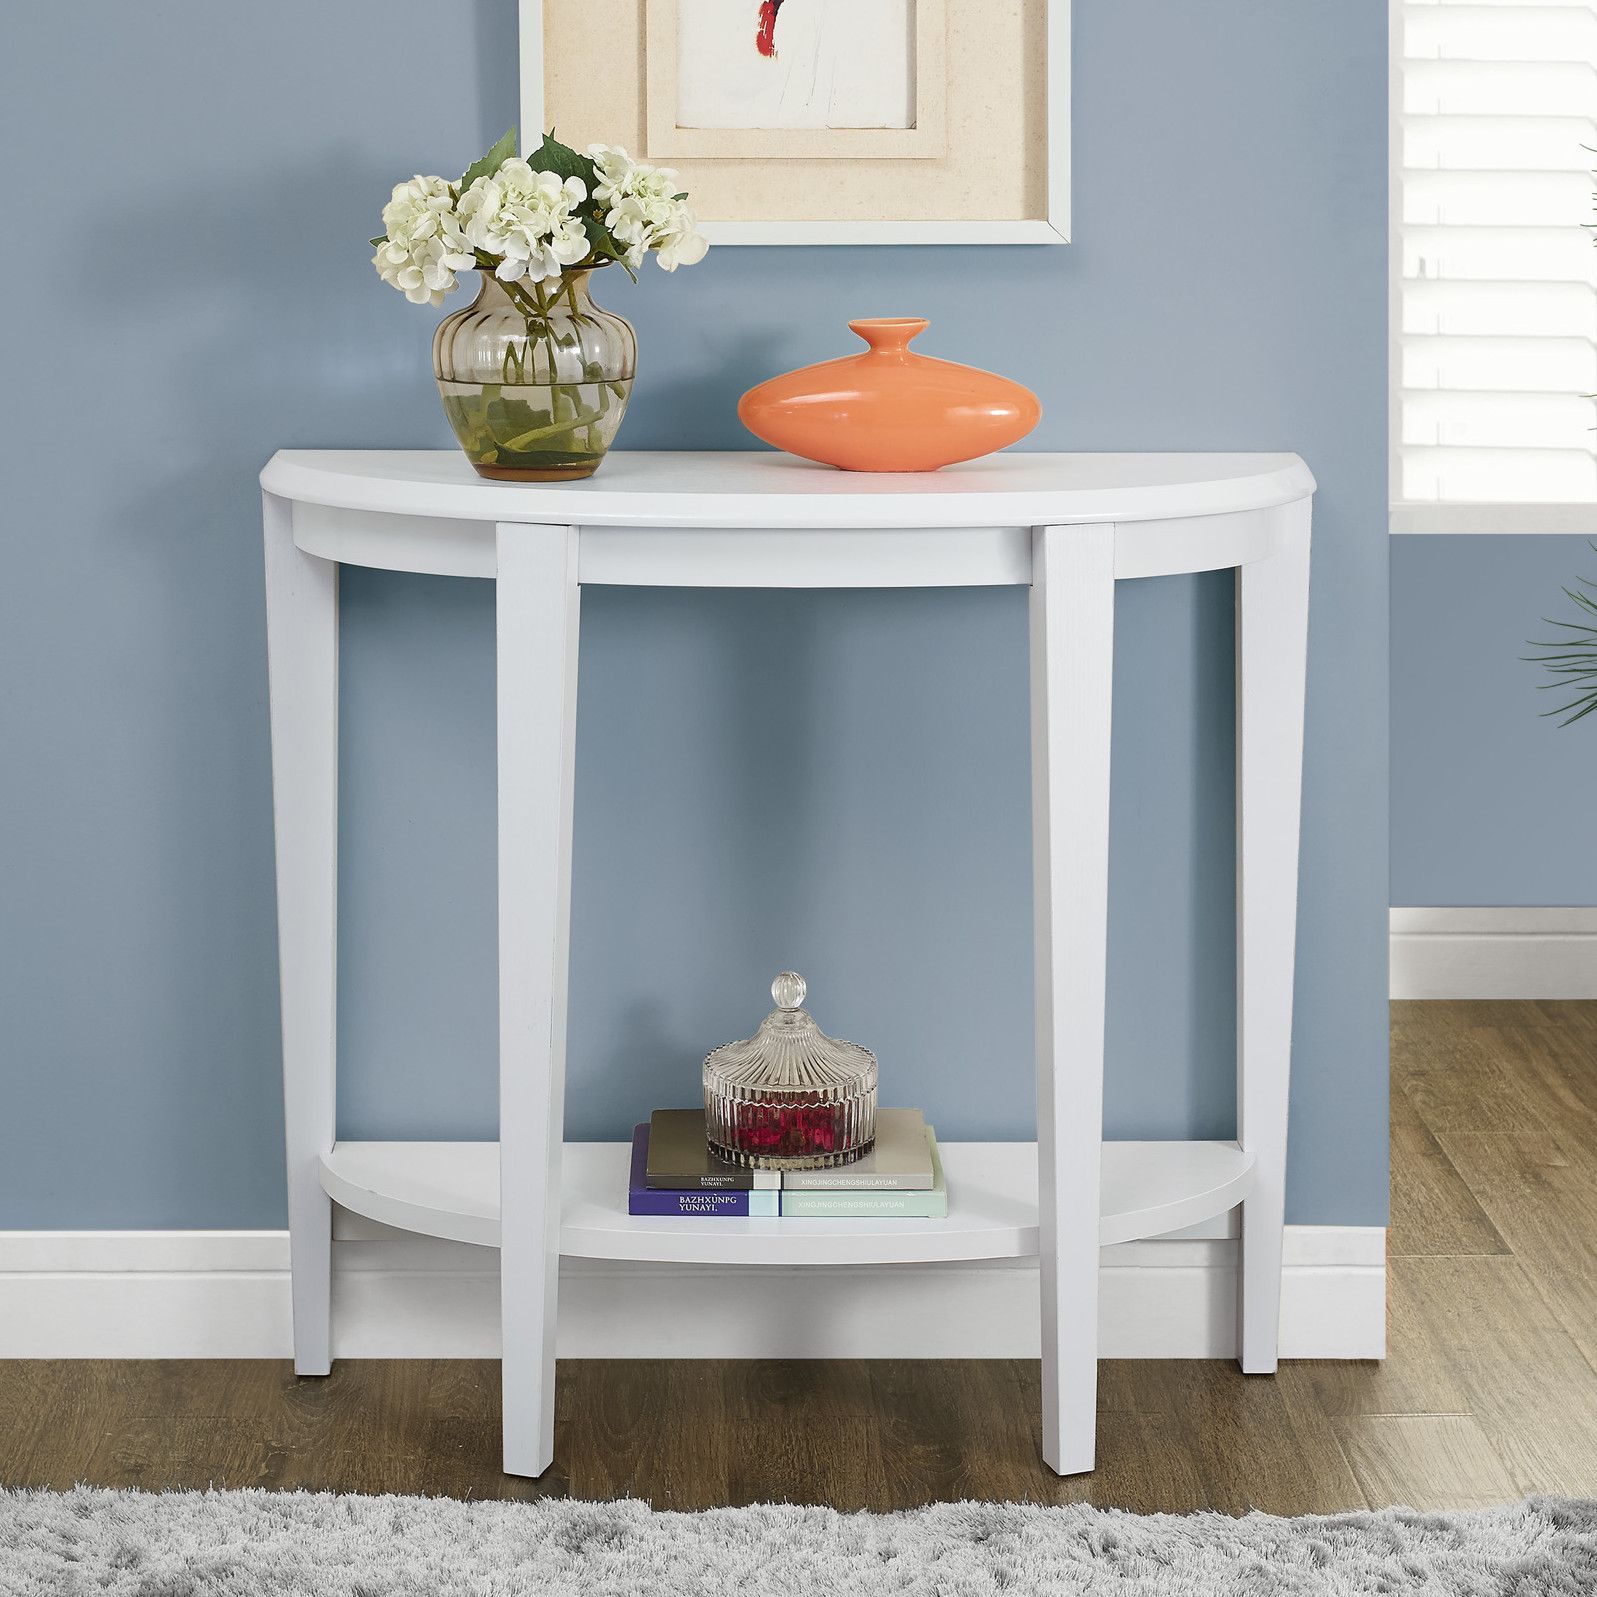 blakeway half moon console table products accent gold legs comfy garden chair target kids furniture narrow hallway extra chromebook bistro thin gallerie magnussen glass coffee